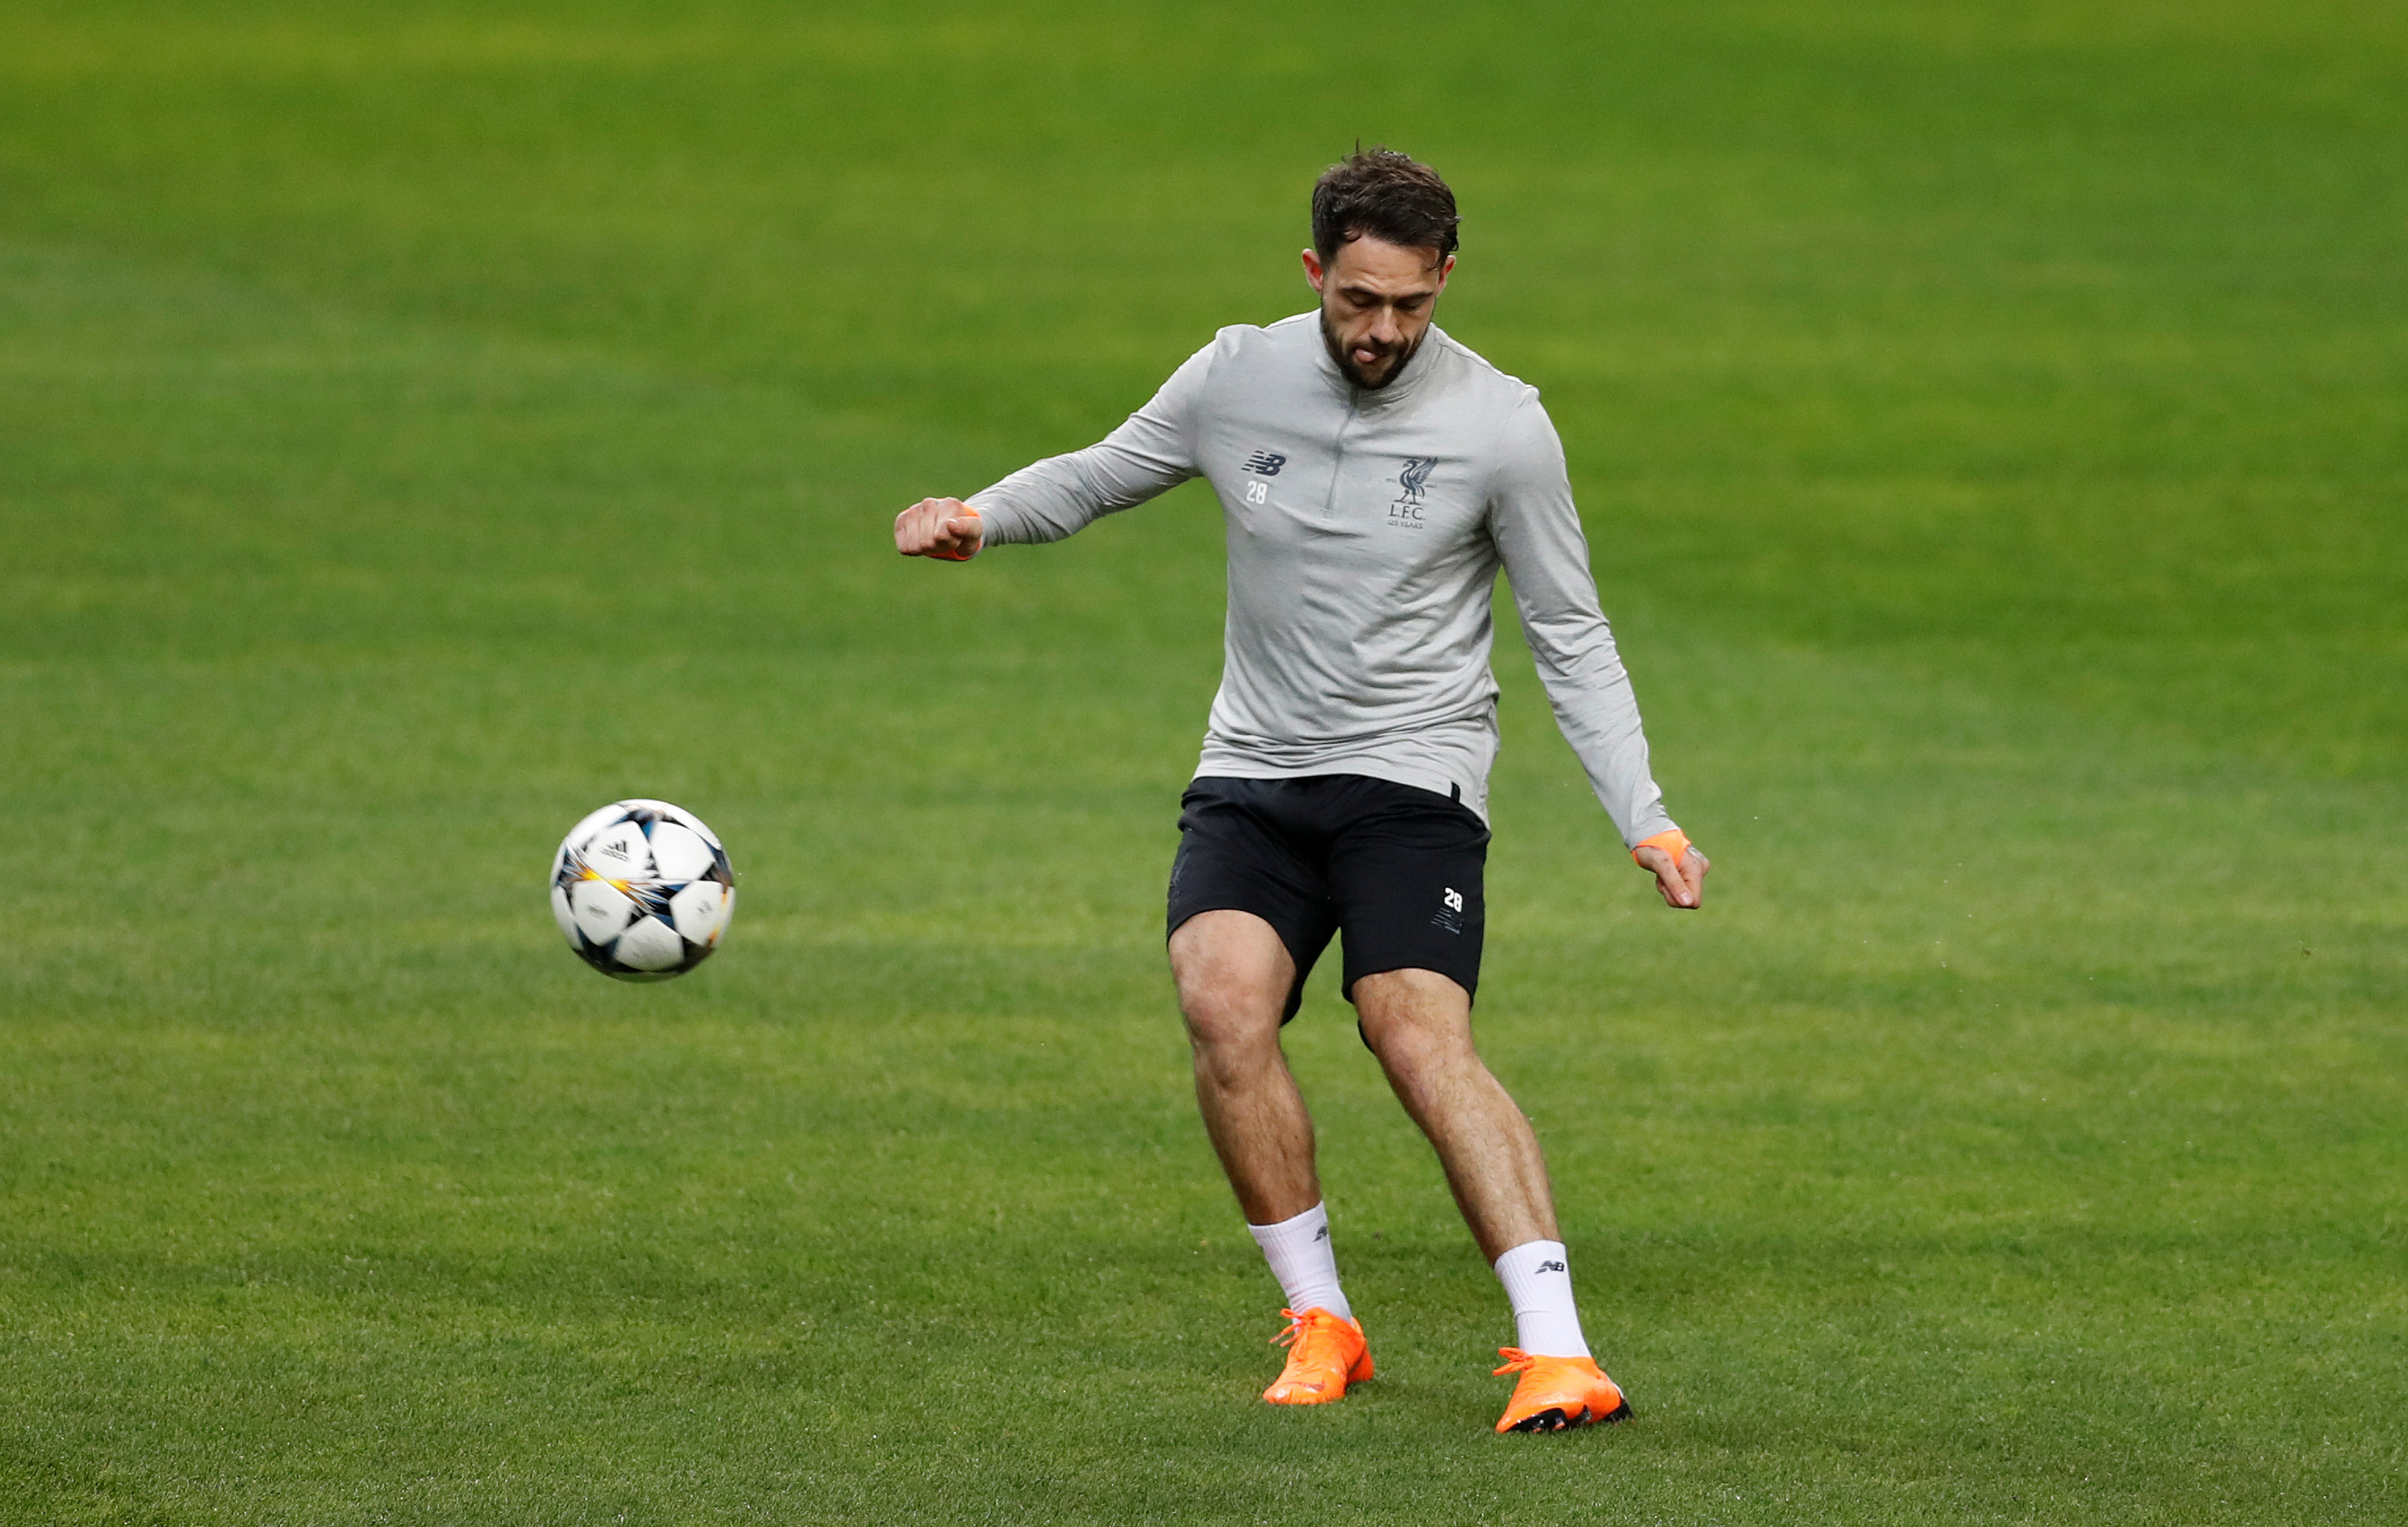 Football: Liverpool's Ings inspired by tireless Firmino